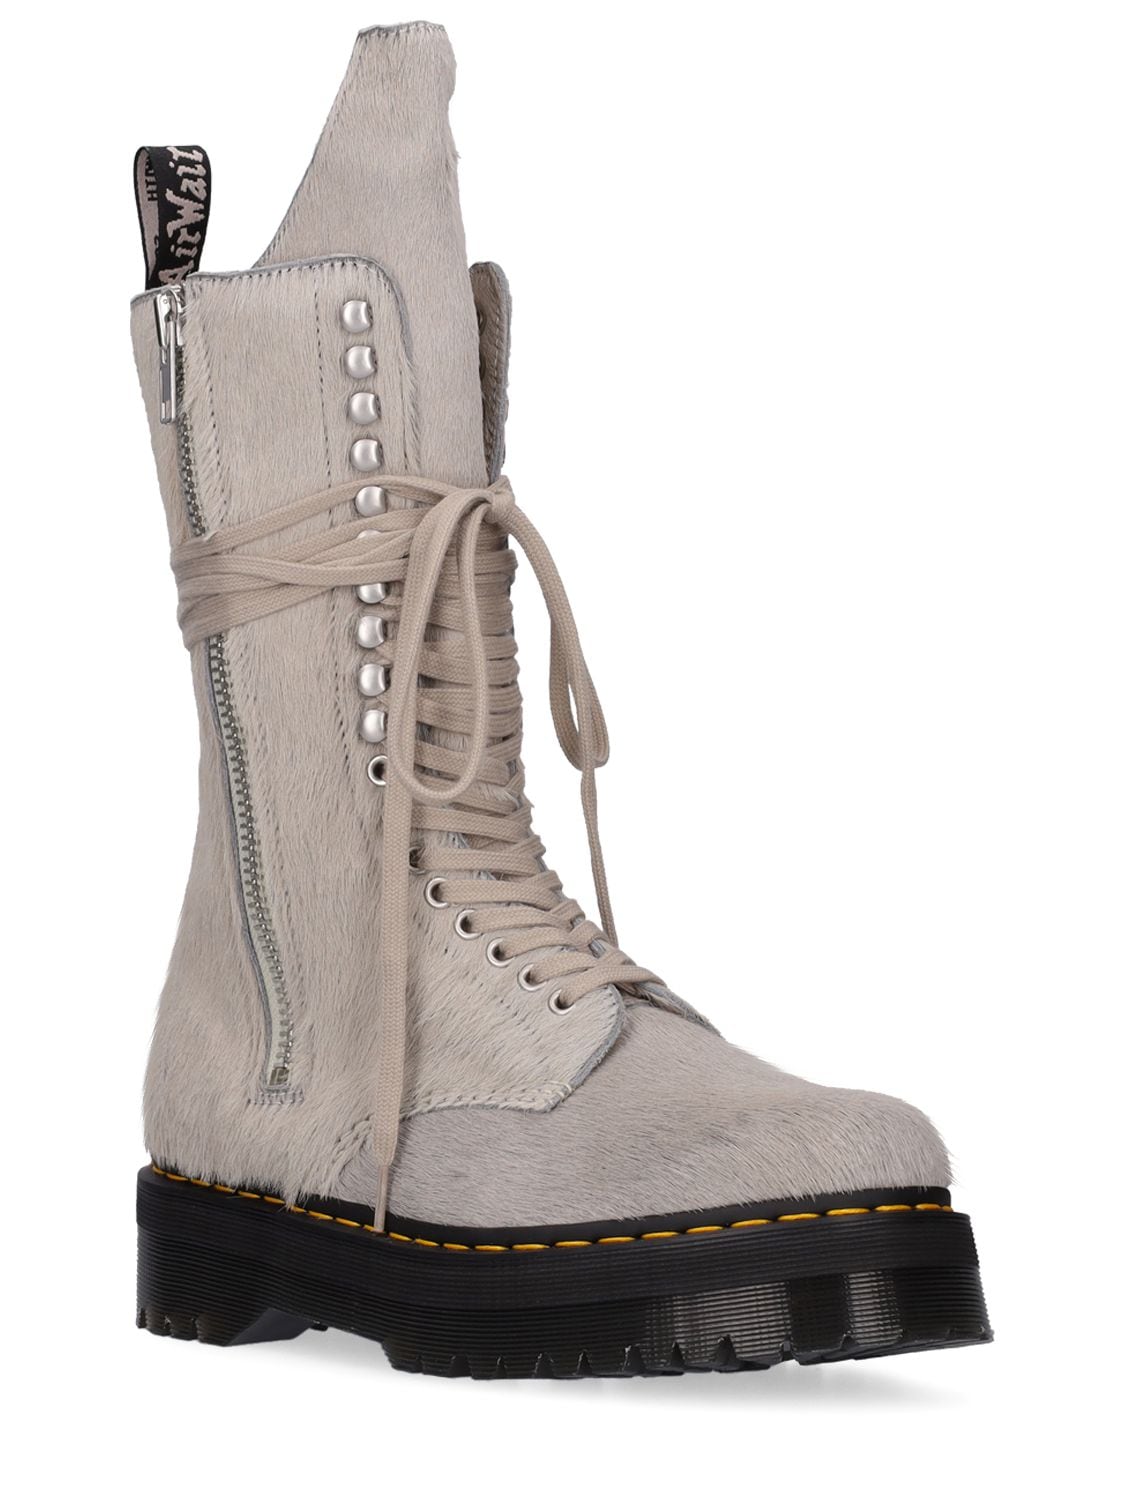 Dr. Martens Quad Sole Calf Length Boots In White